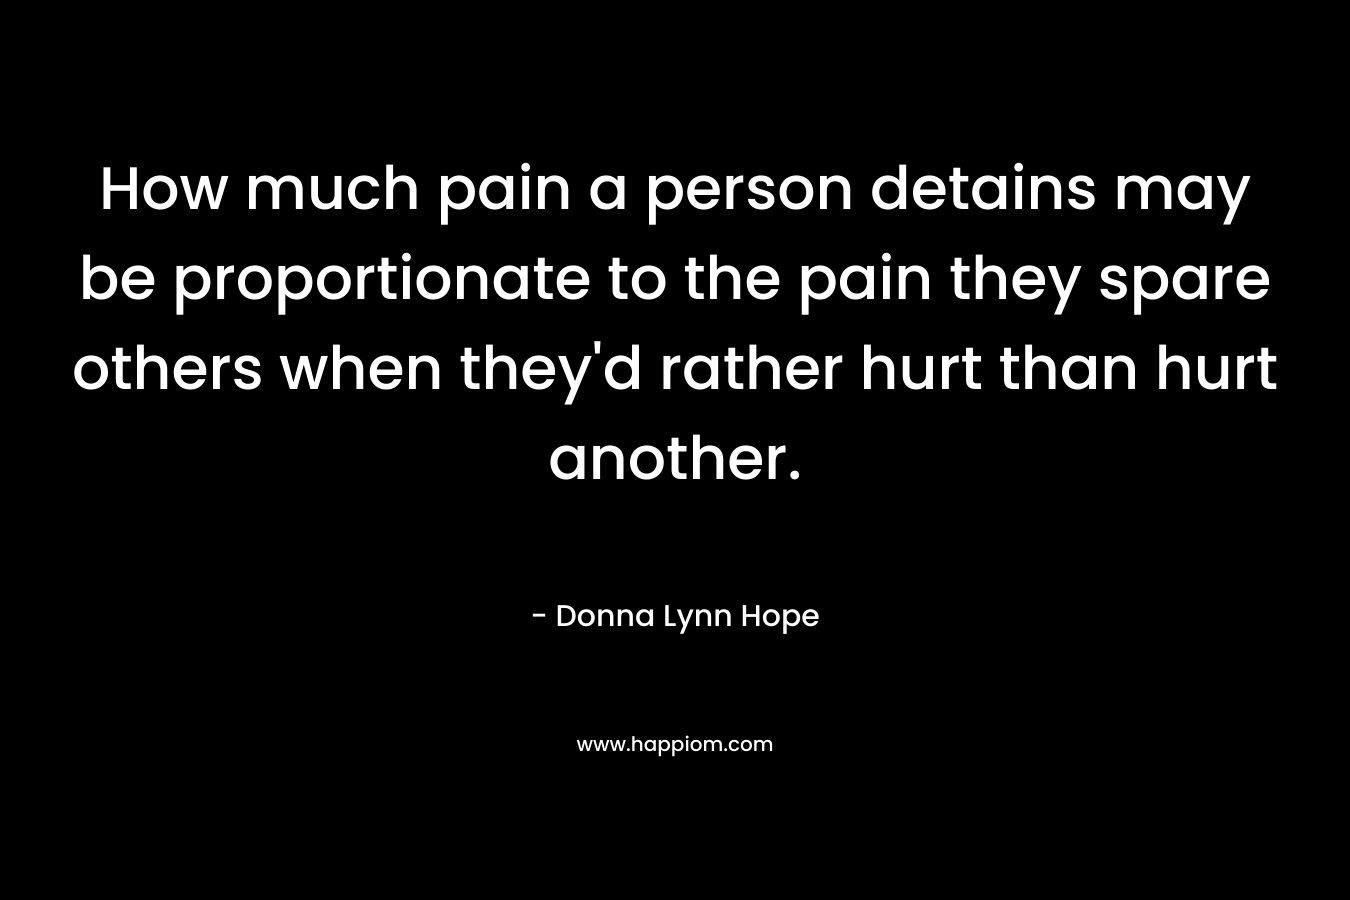 How much pain a person detains may be proportionate to the pain they spare others when they’d rather hurt than hurt another. – Donna Lynn Hope